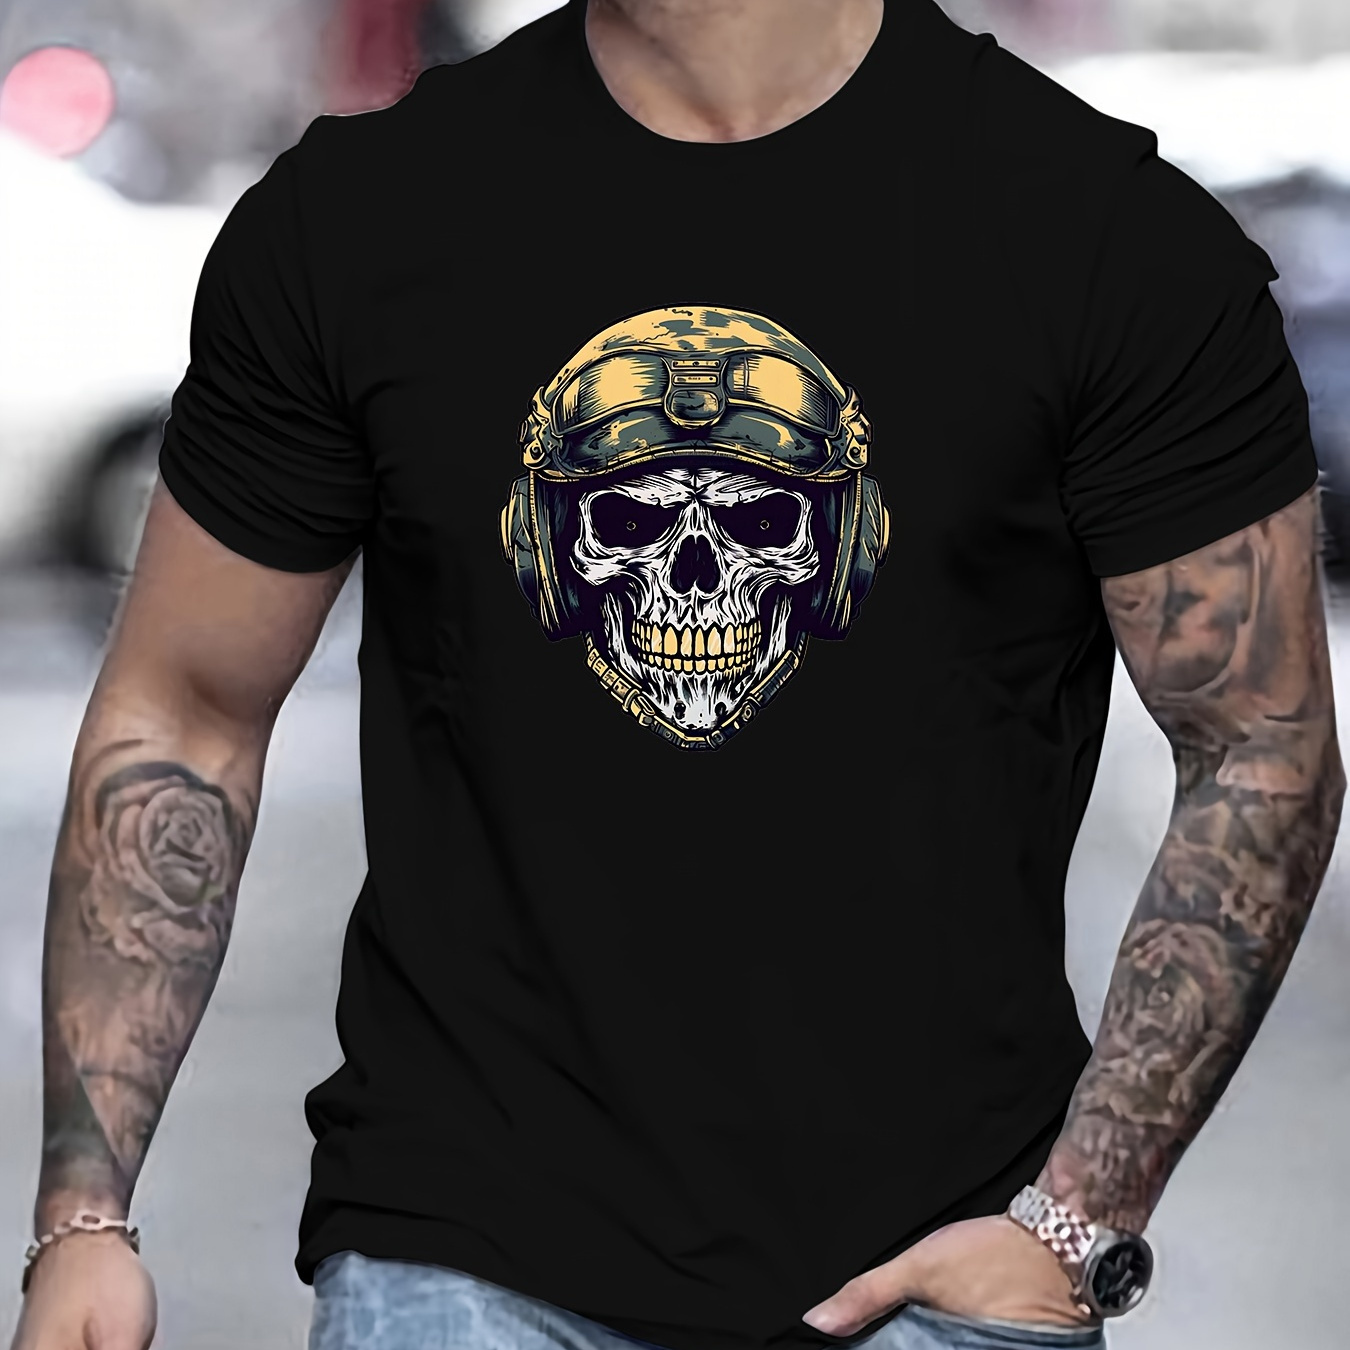 

Cartoon Skull Graphic Print, Men's Comfy Cotton T-shirt, Casual Fit Tee, Cool Top Clothing For Men For Summer For Everyday Activities